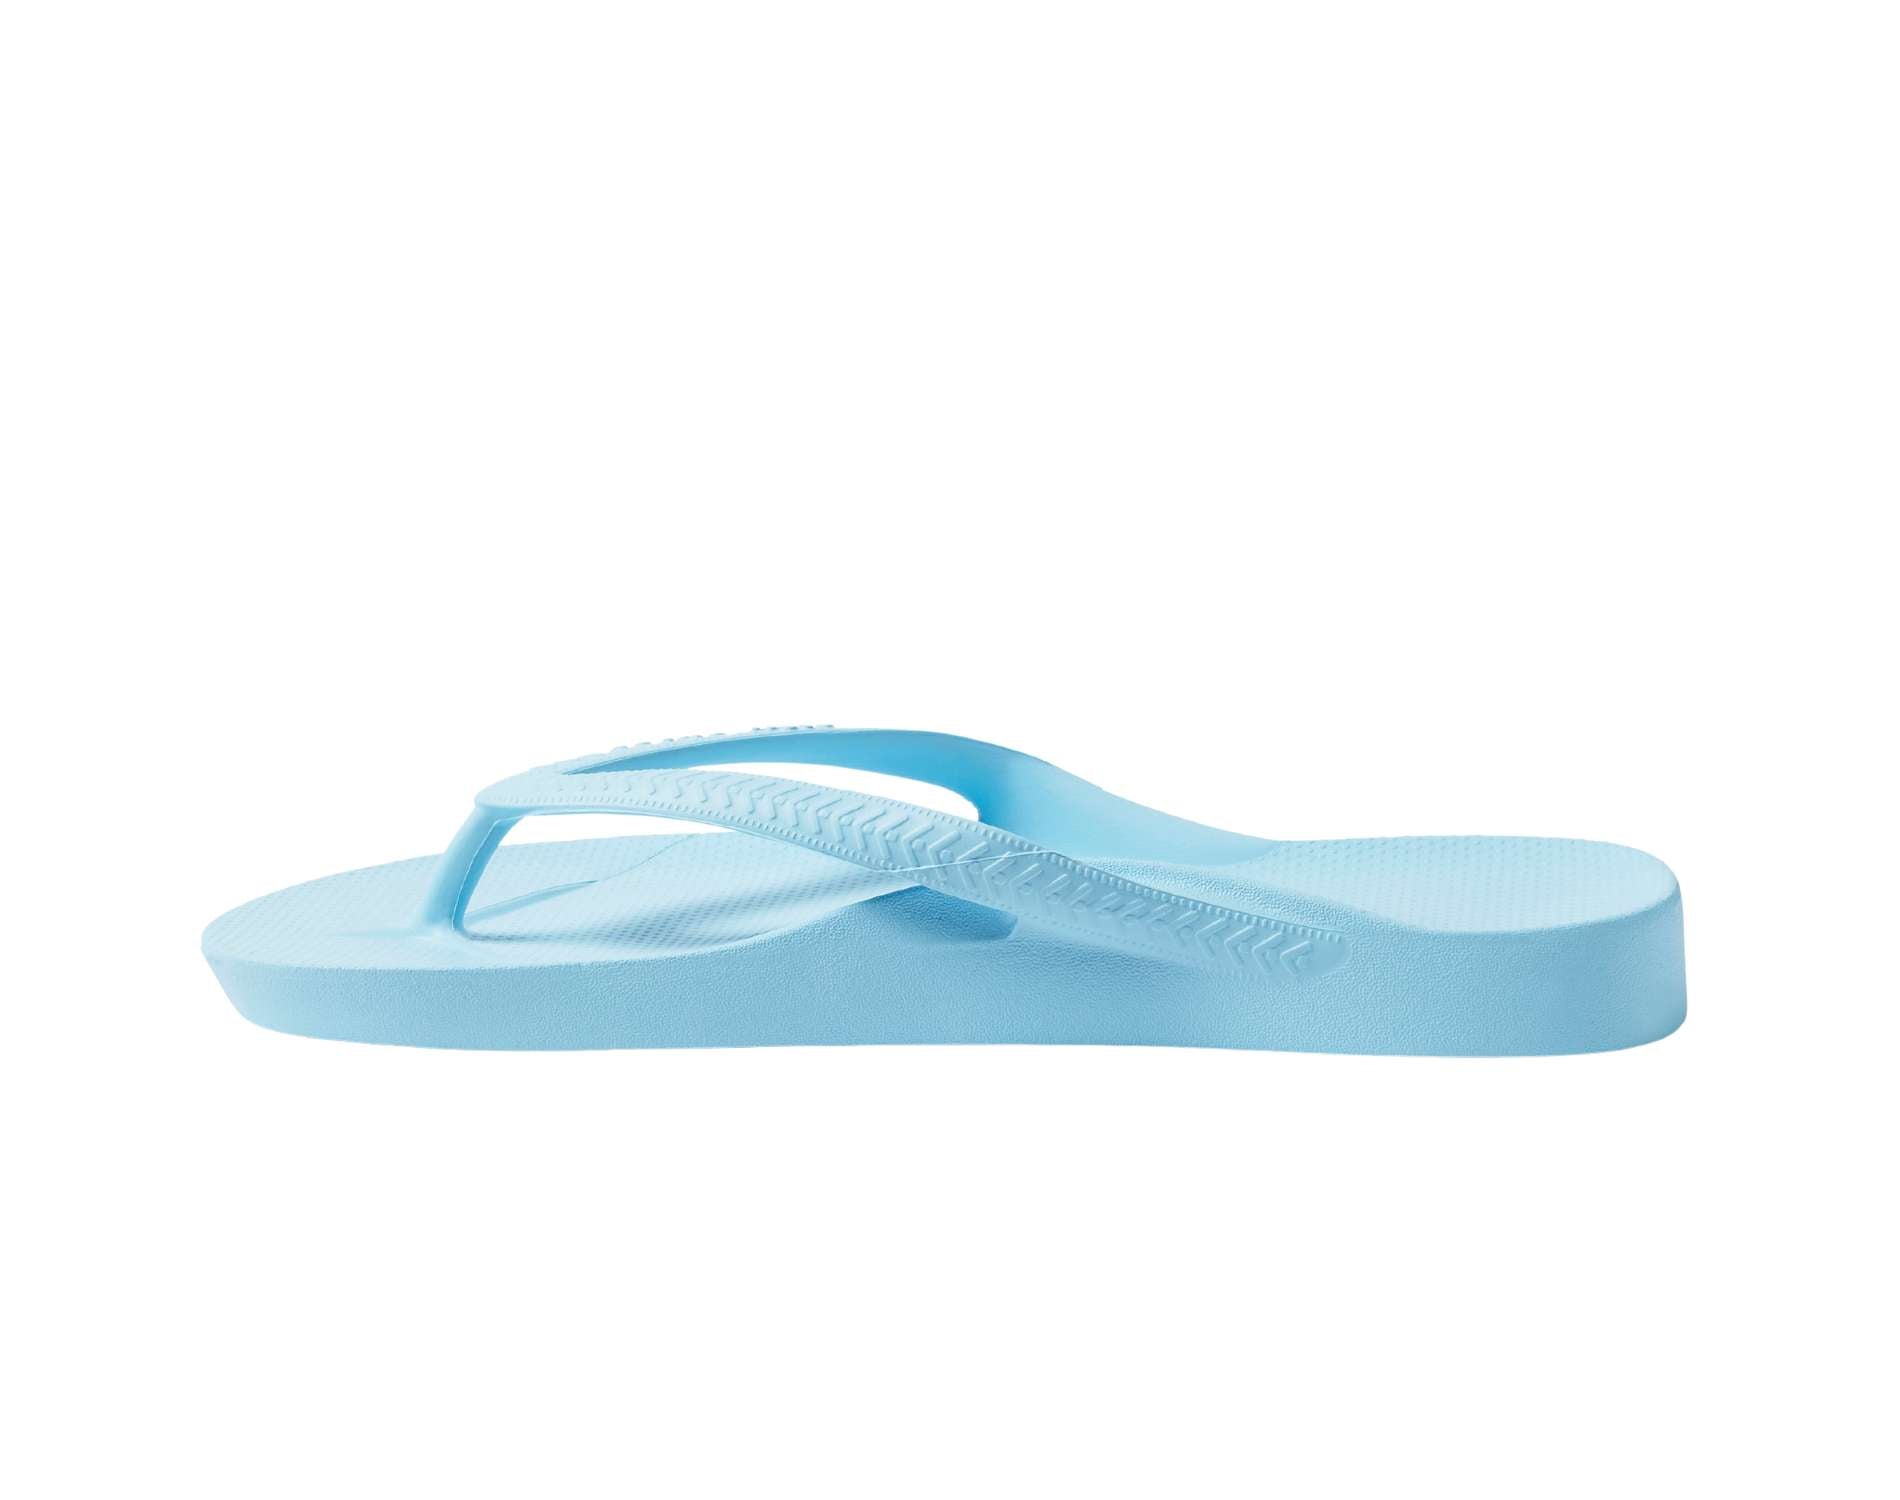 Archies arch support thongs in sky blue colour